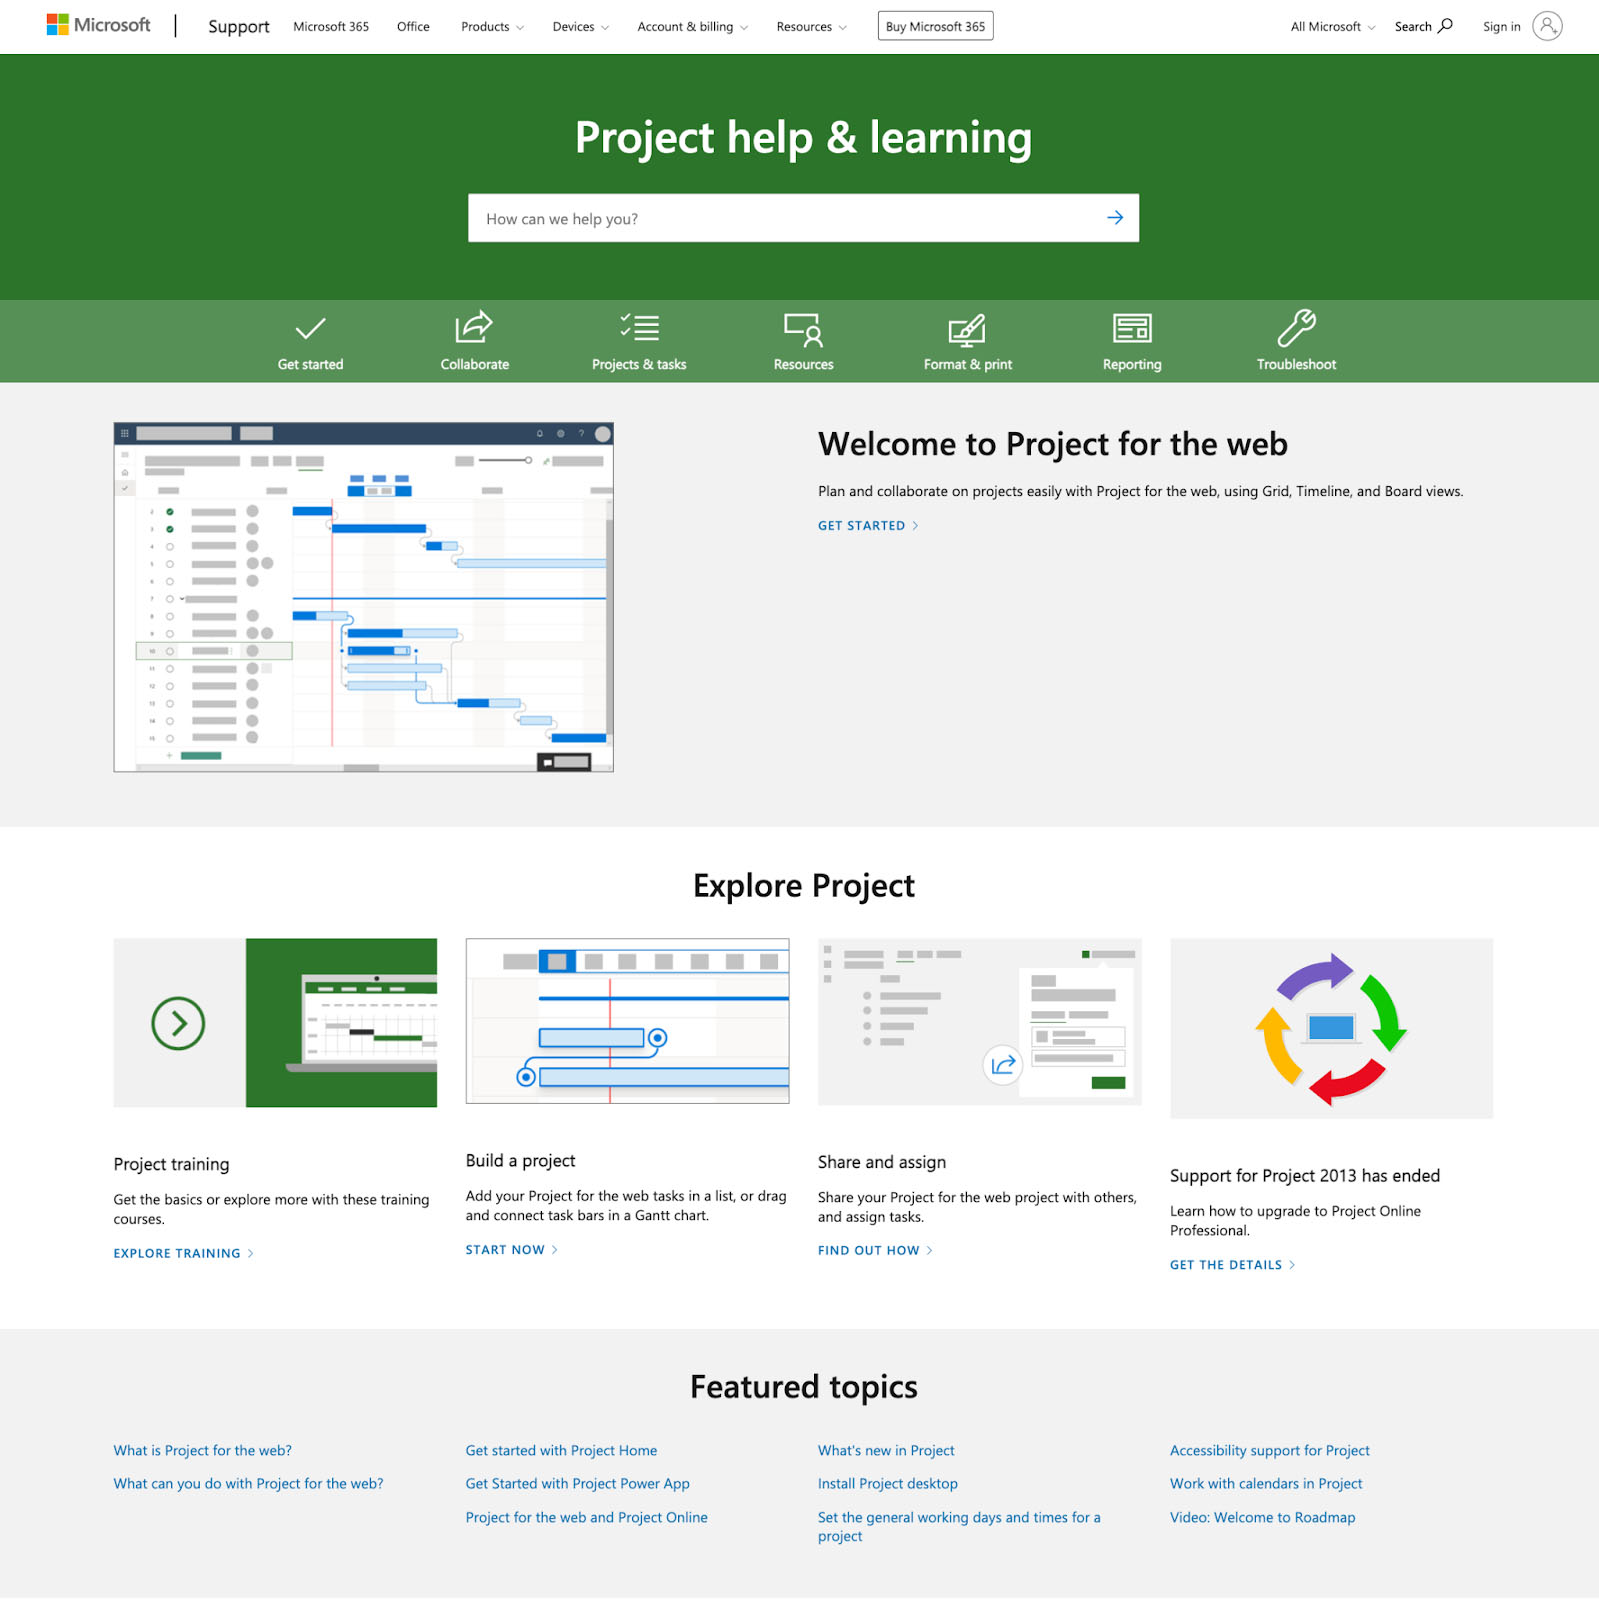 Microsoft Project's "Project help & learning" web page.